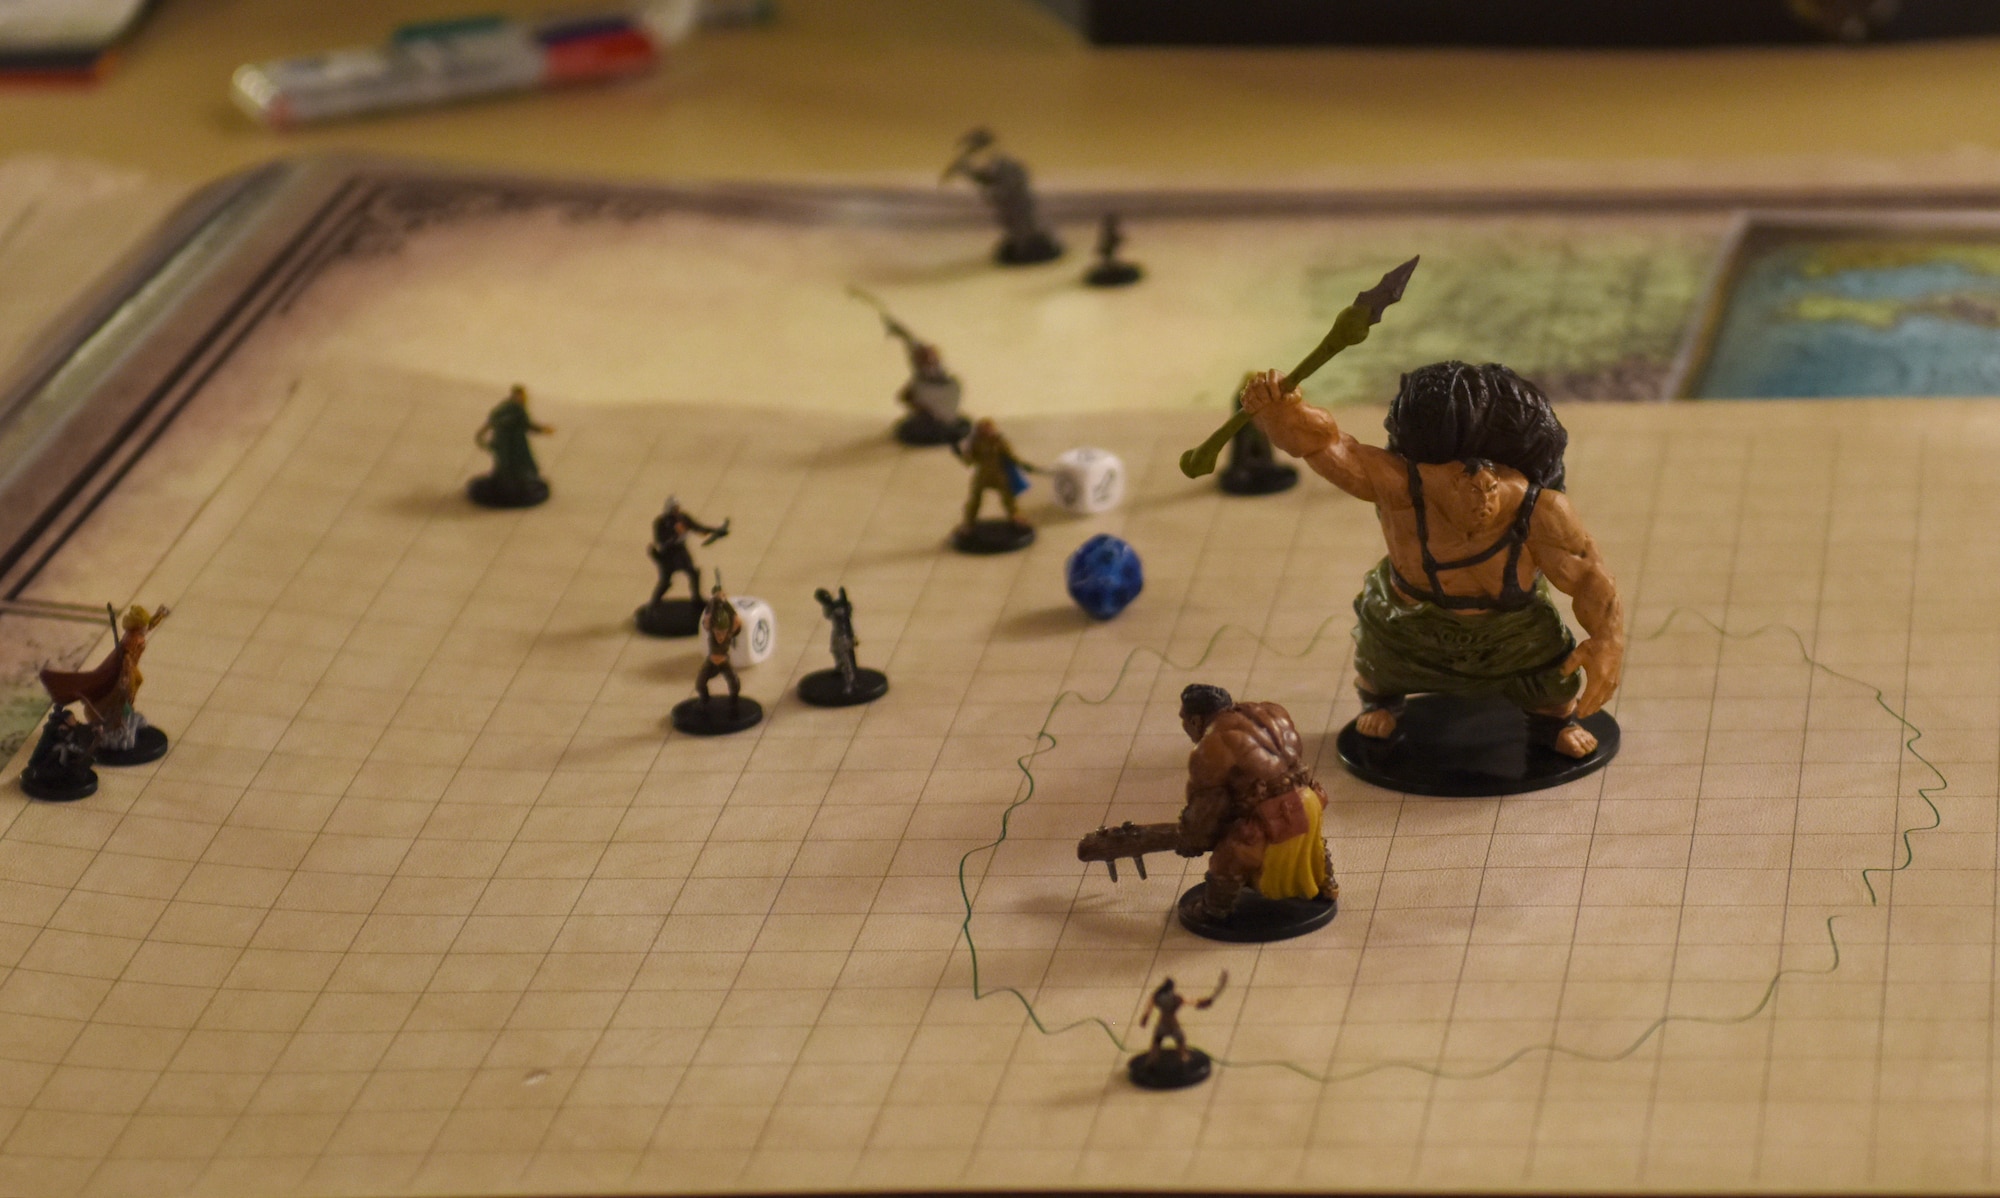 Dungeons & Dragons: The adventure continues